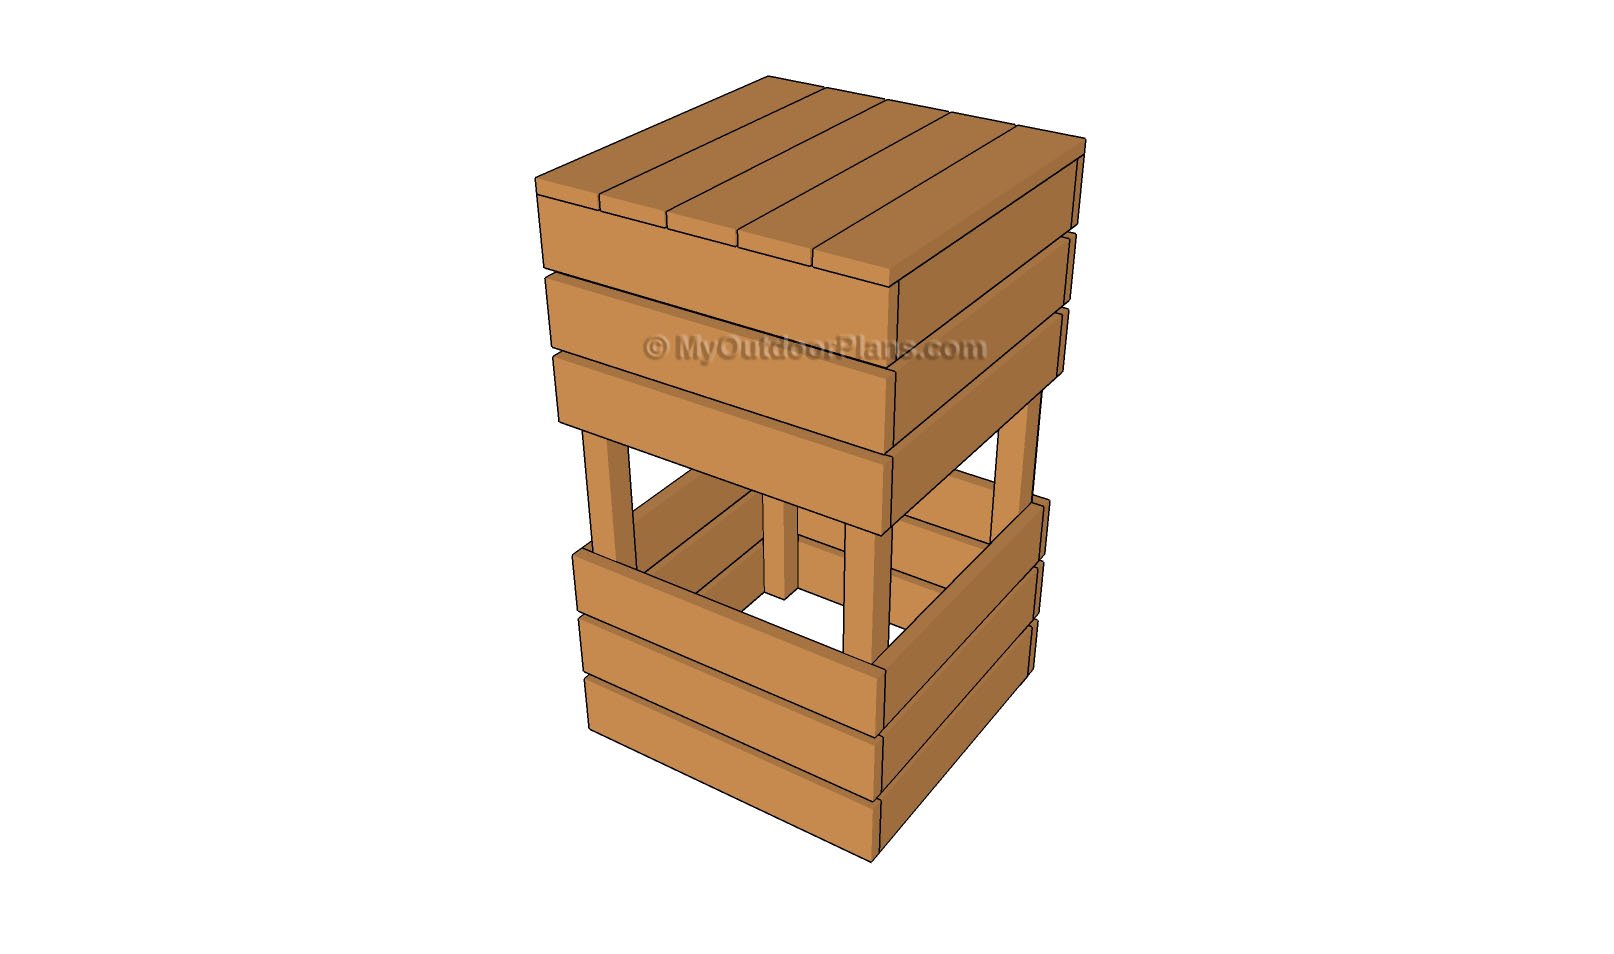 Pallet Bar Stool Plans | Free Outdoor Plans - DIY Shed, Wooden 